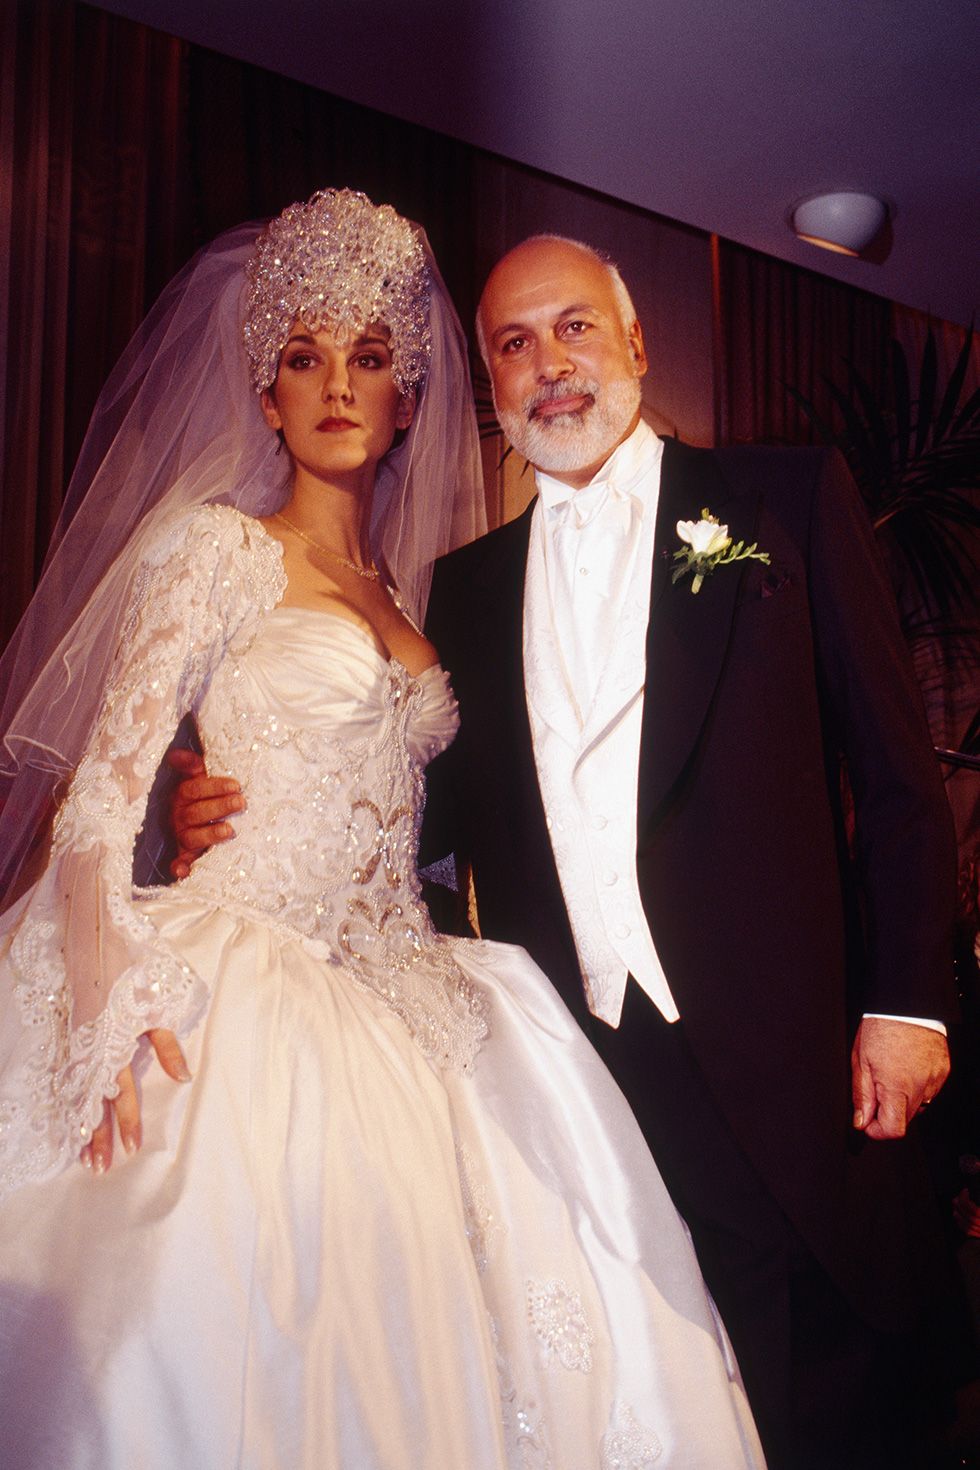 The Most Iconic Wedding Dresses Worn by Famous Brides of All Time